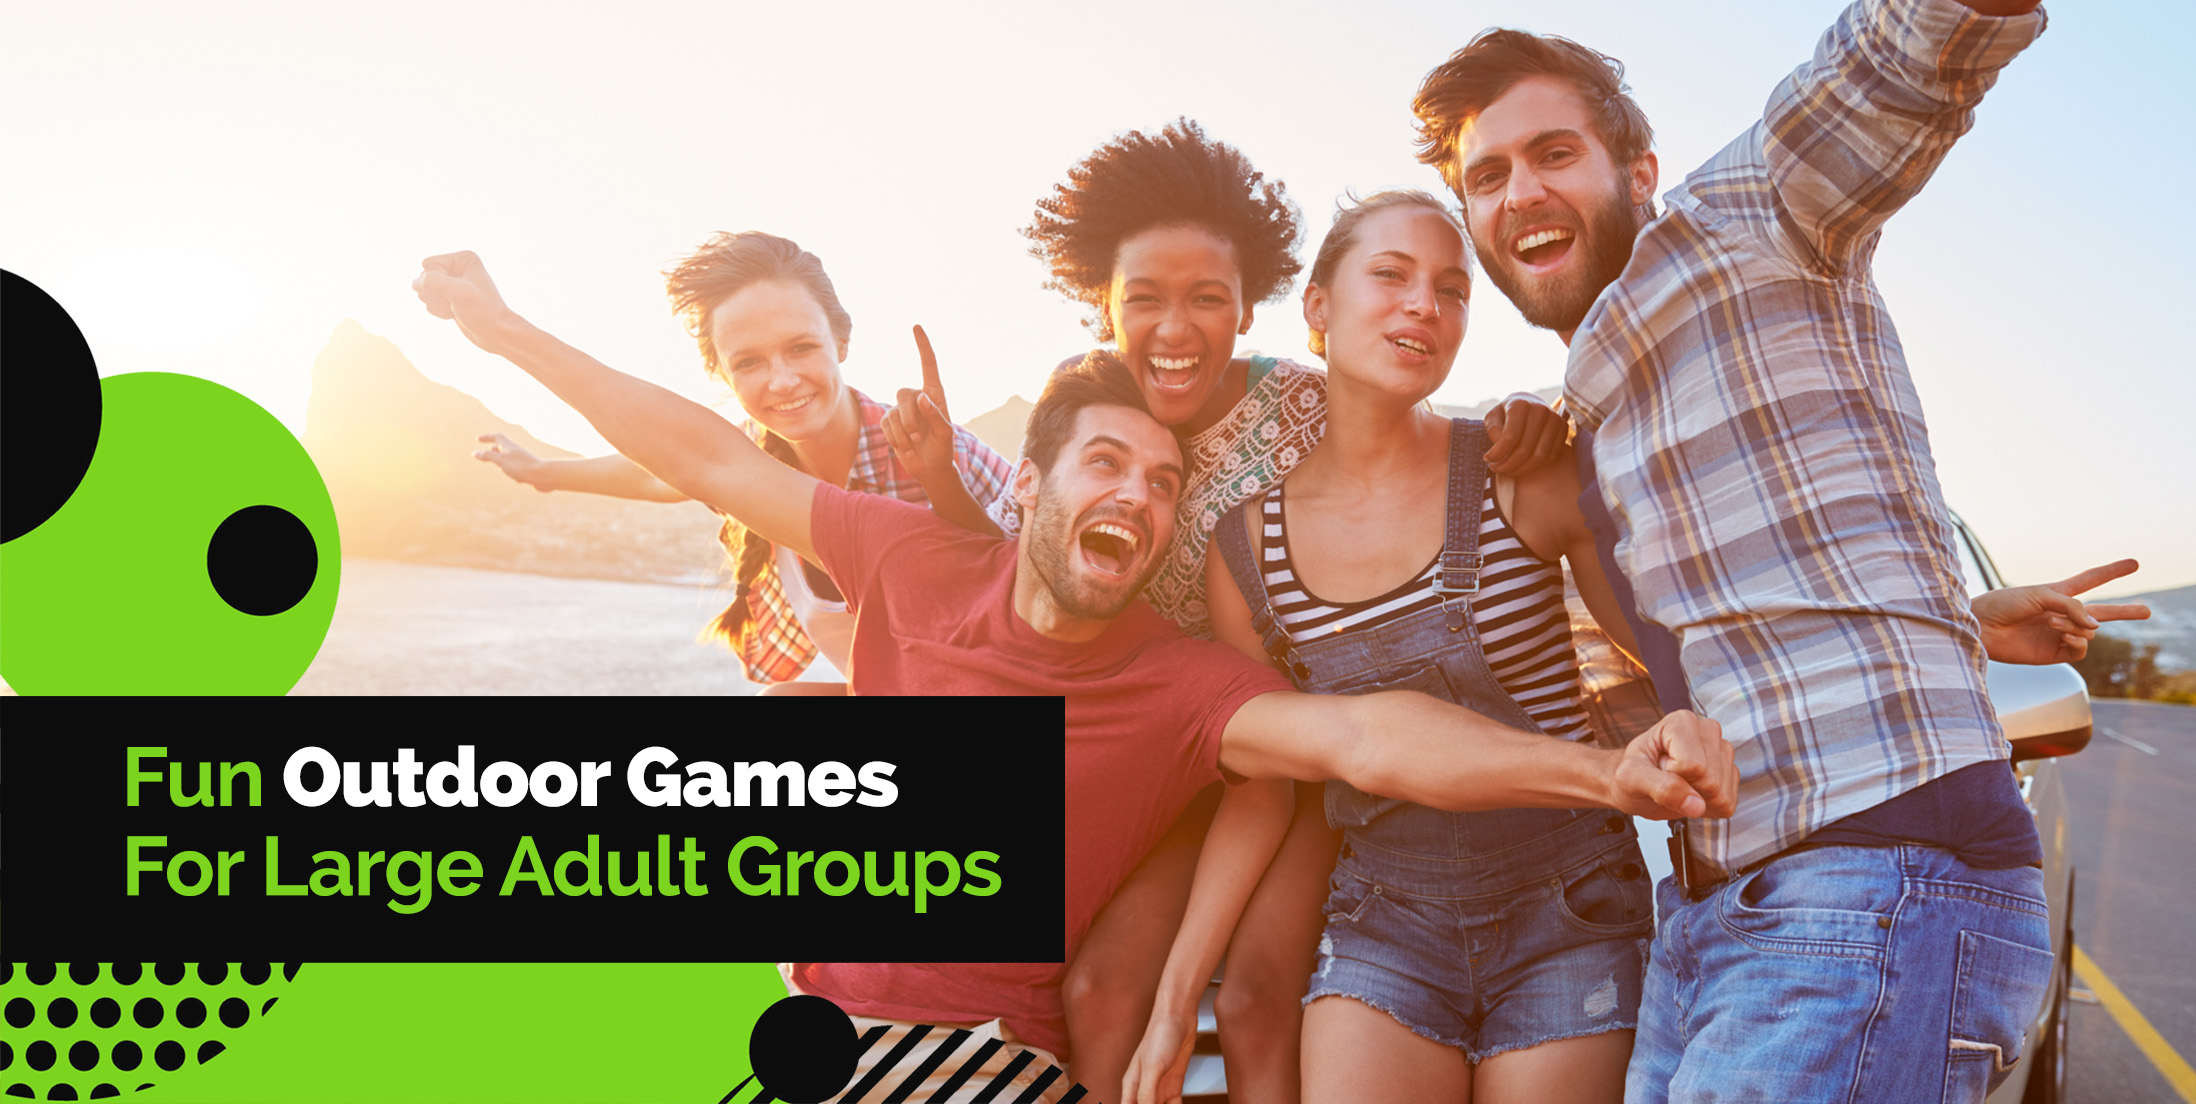 Fun Outdoor Games for Large Groups of Adults